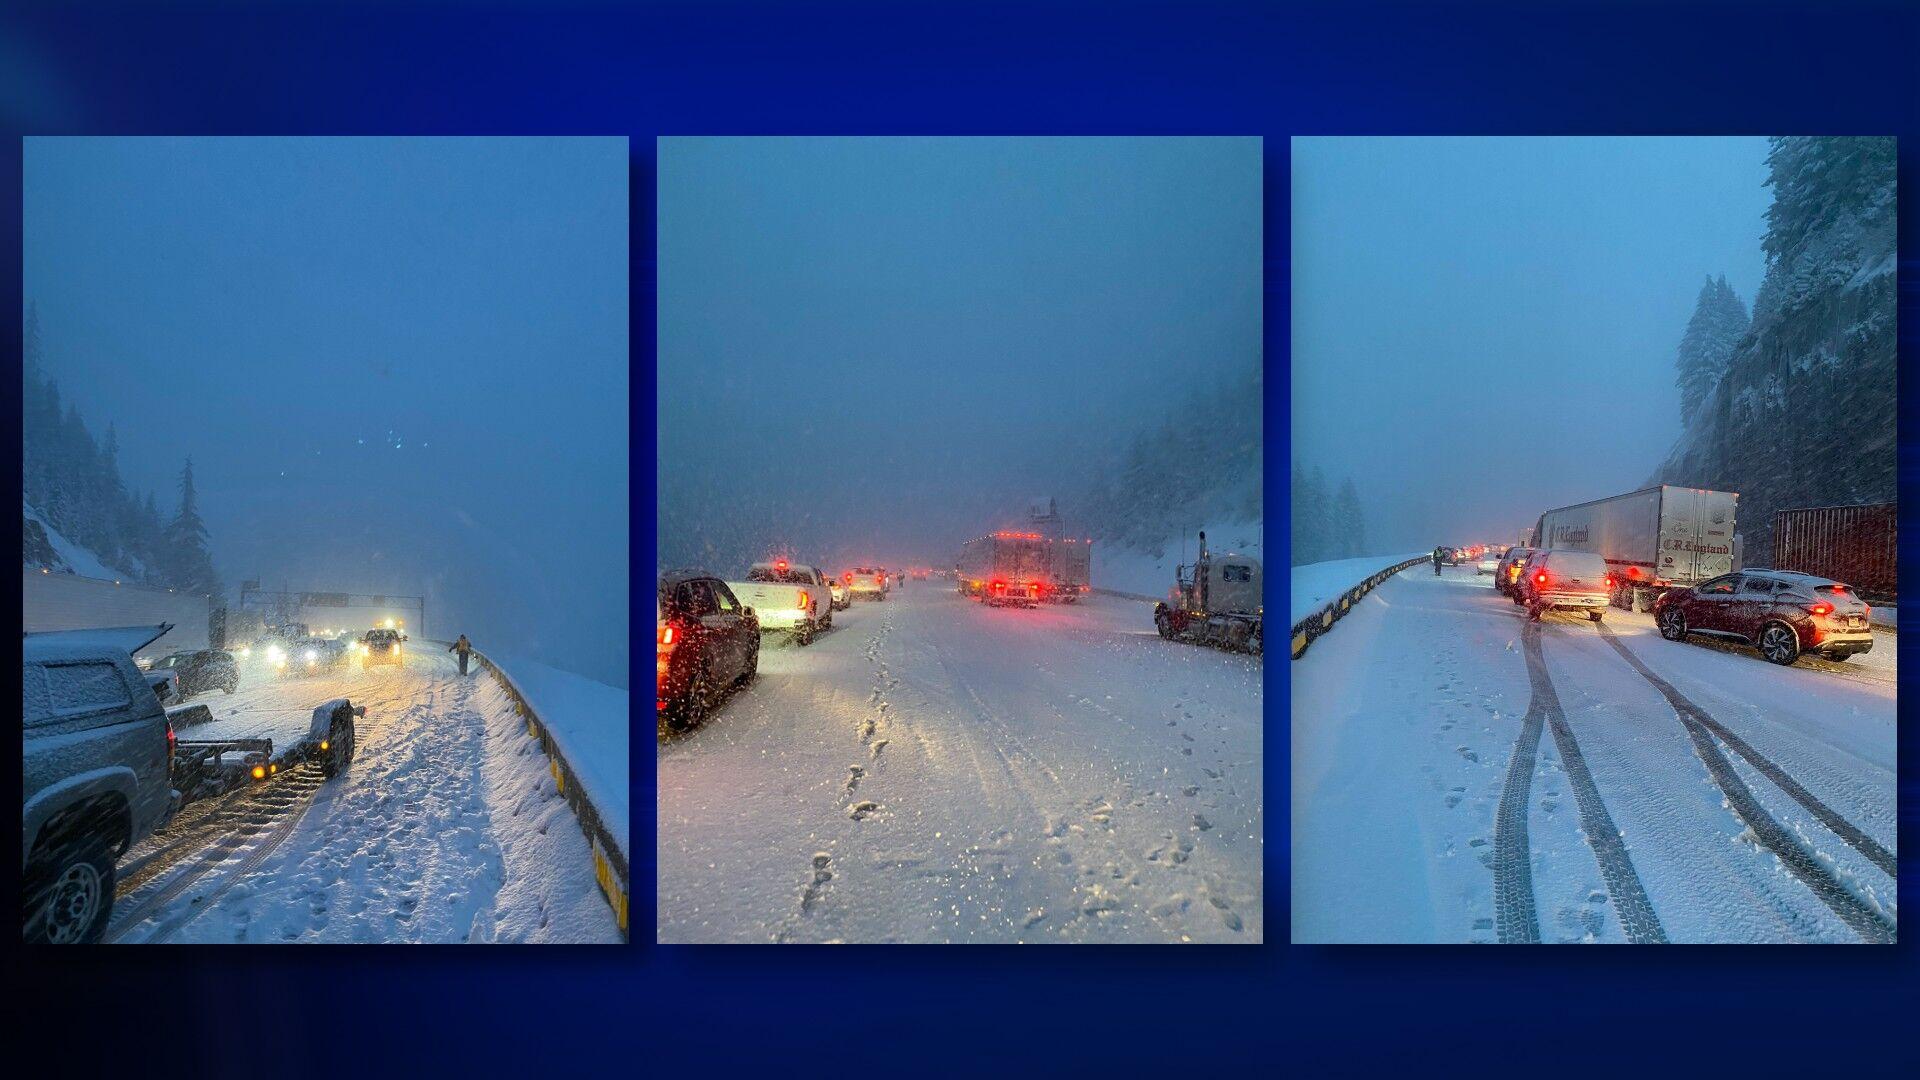 I90 Snoqualmie Pass is closed due to dangerous weather conditions